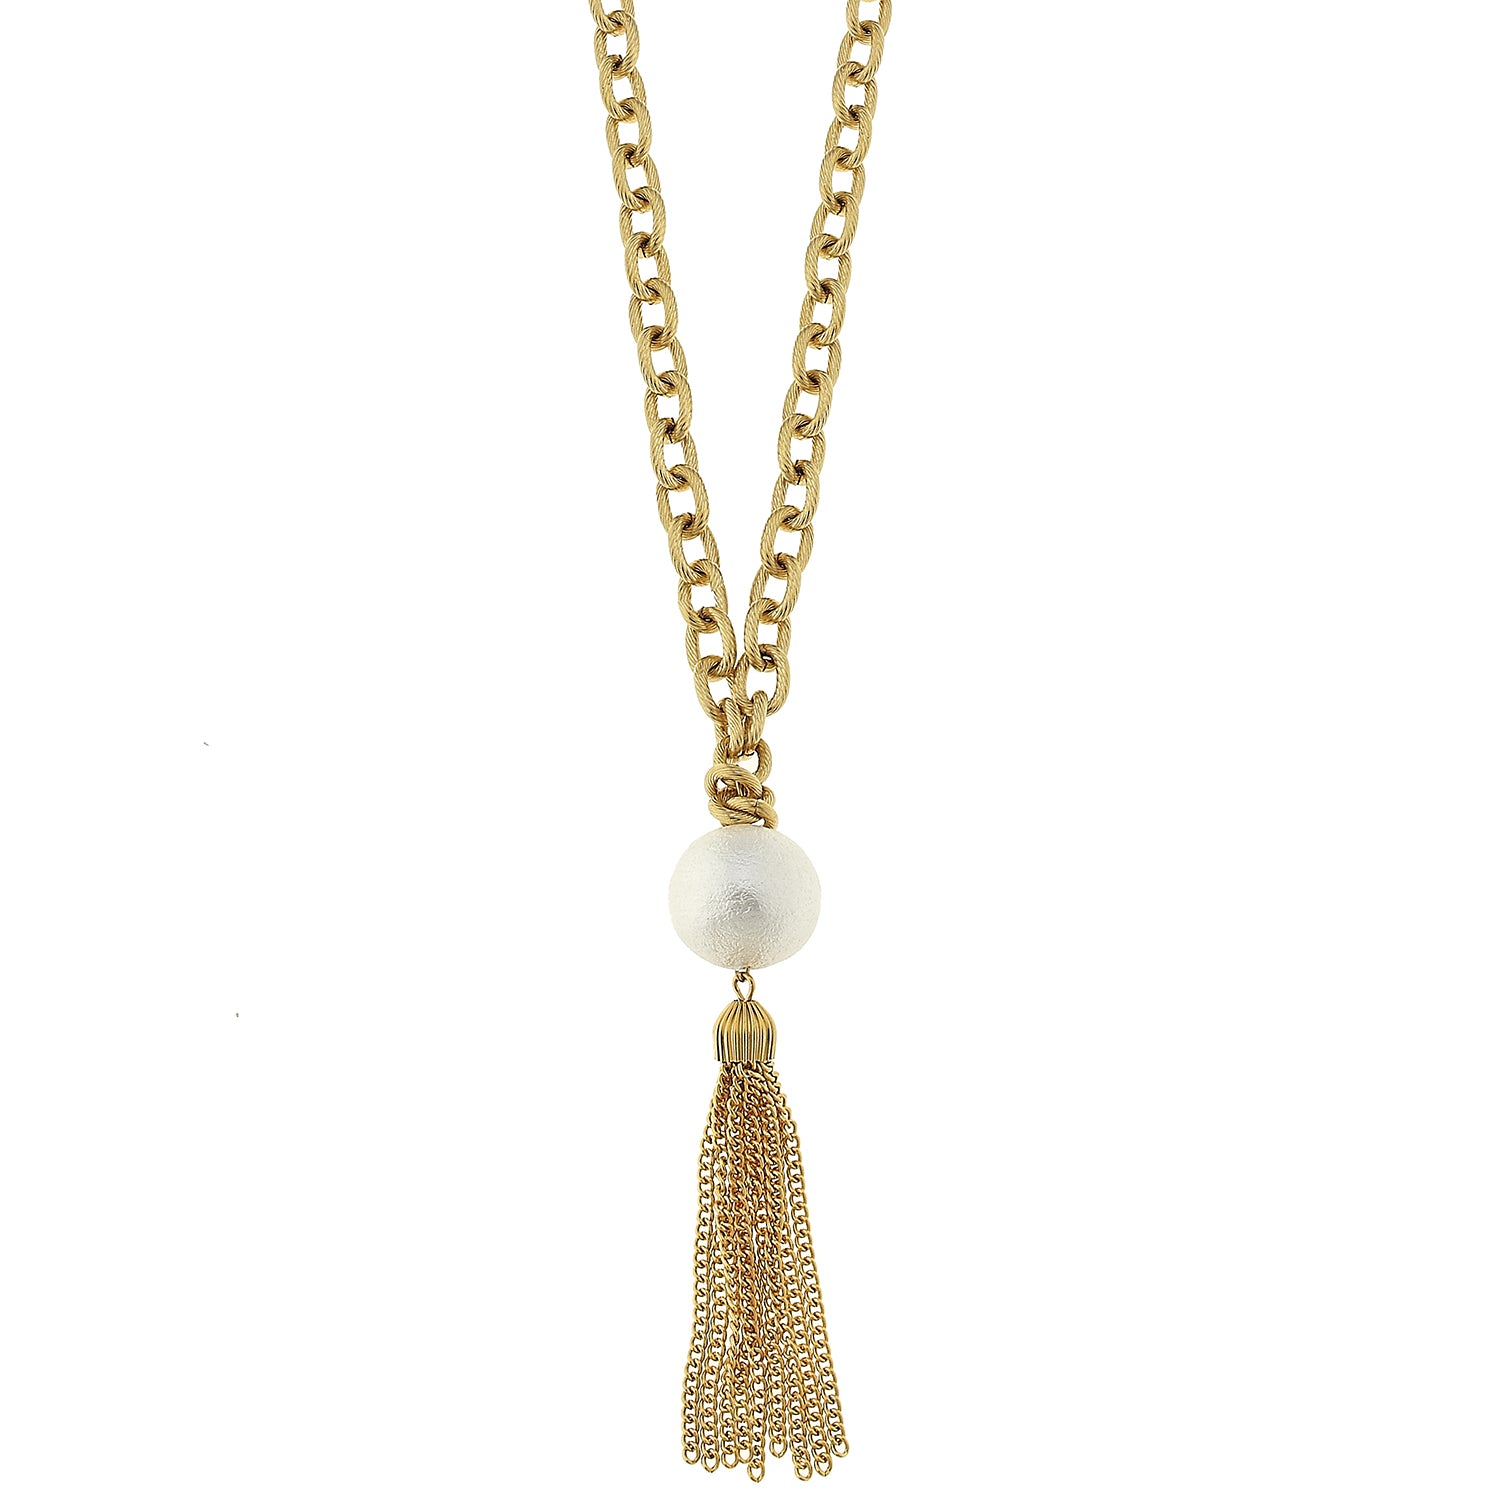 Susan Shaw's 32" Gold Chain with White Cotton Pearl and Tassel is the perfect quirky addition to any jewelry collection.